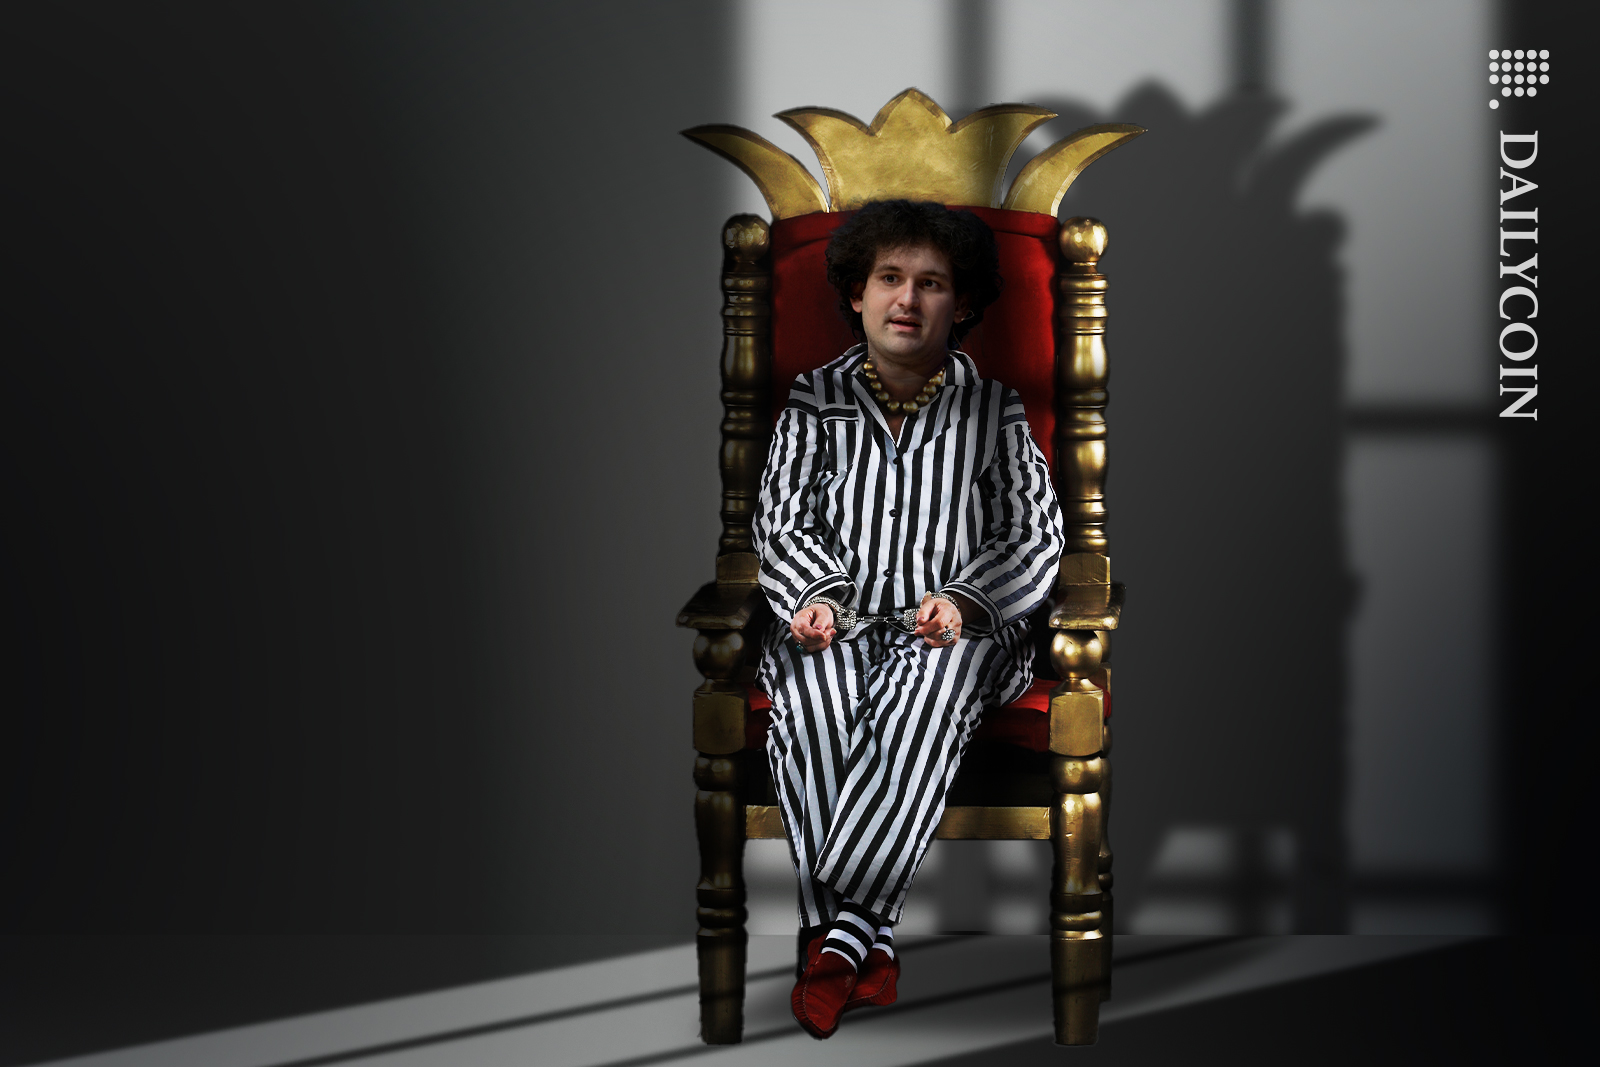 Sam Bankman in a king throne sitting in his cell.